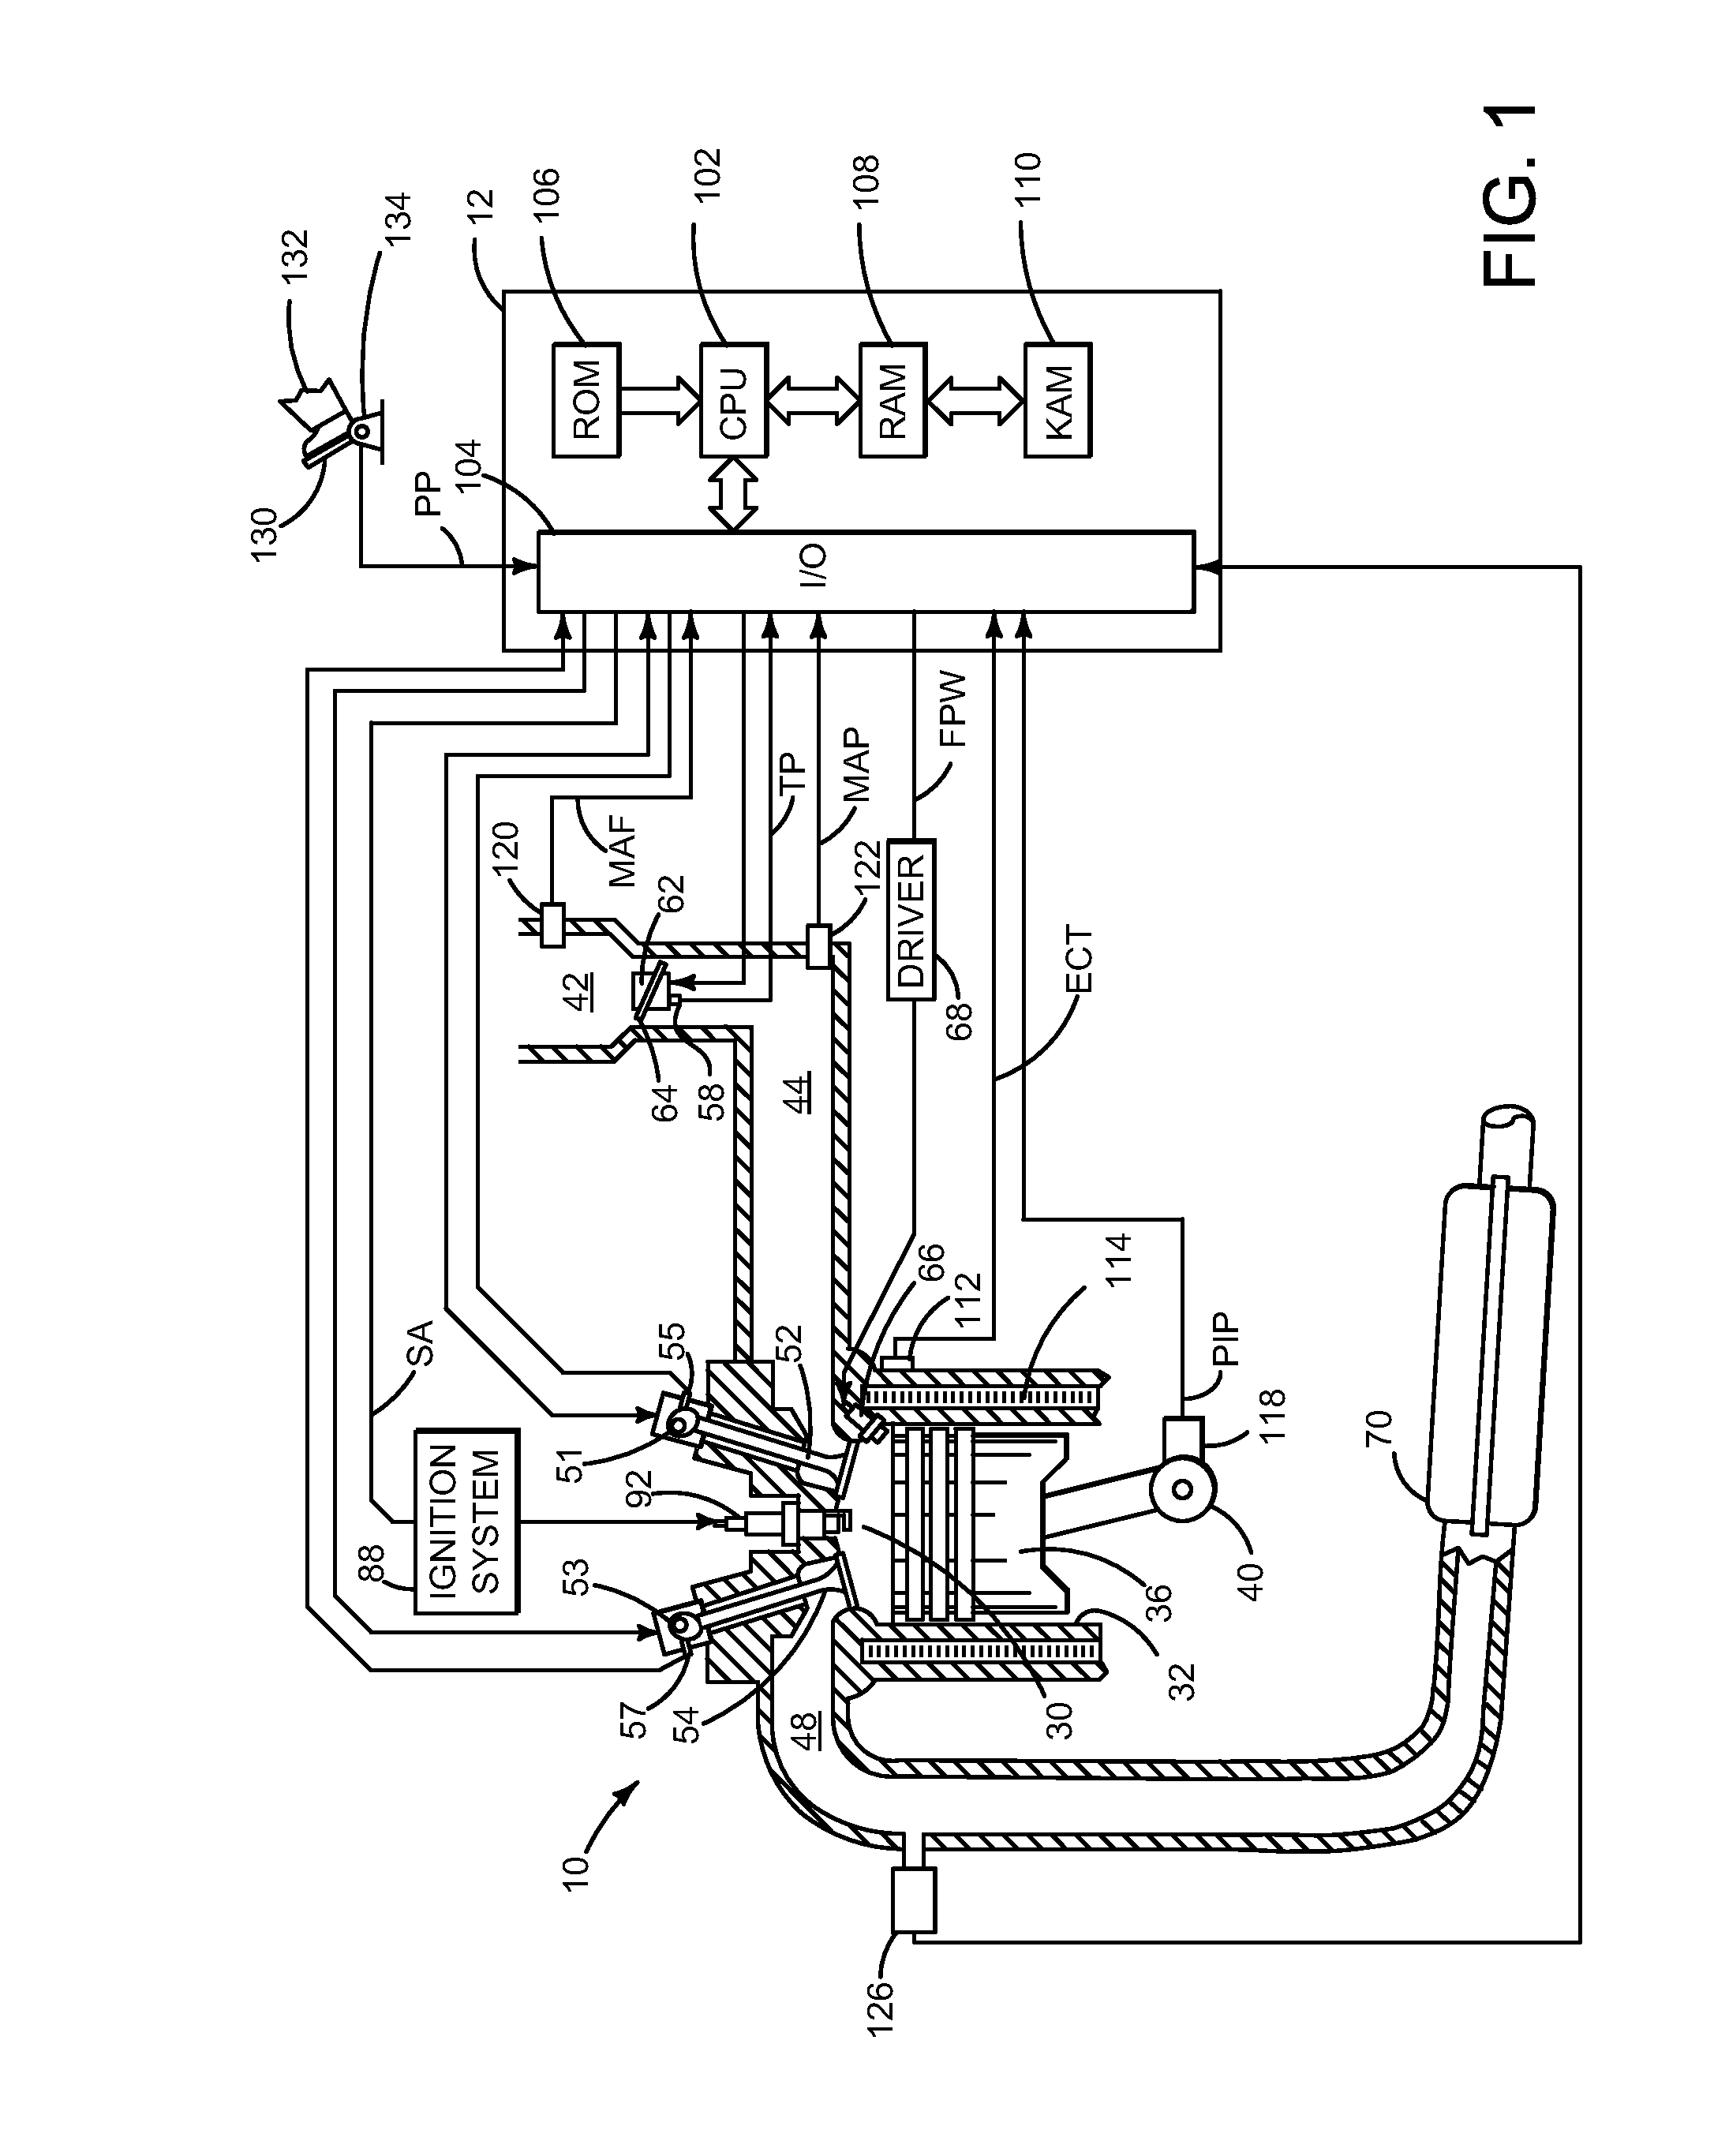 Method for controlling an engine that may be automatically stopped